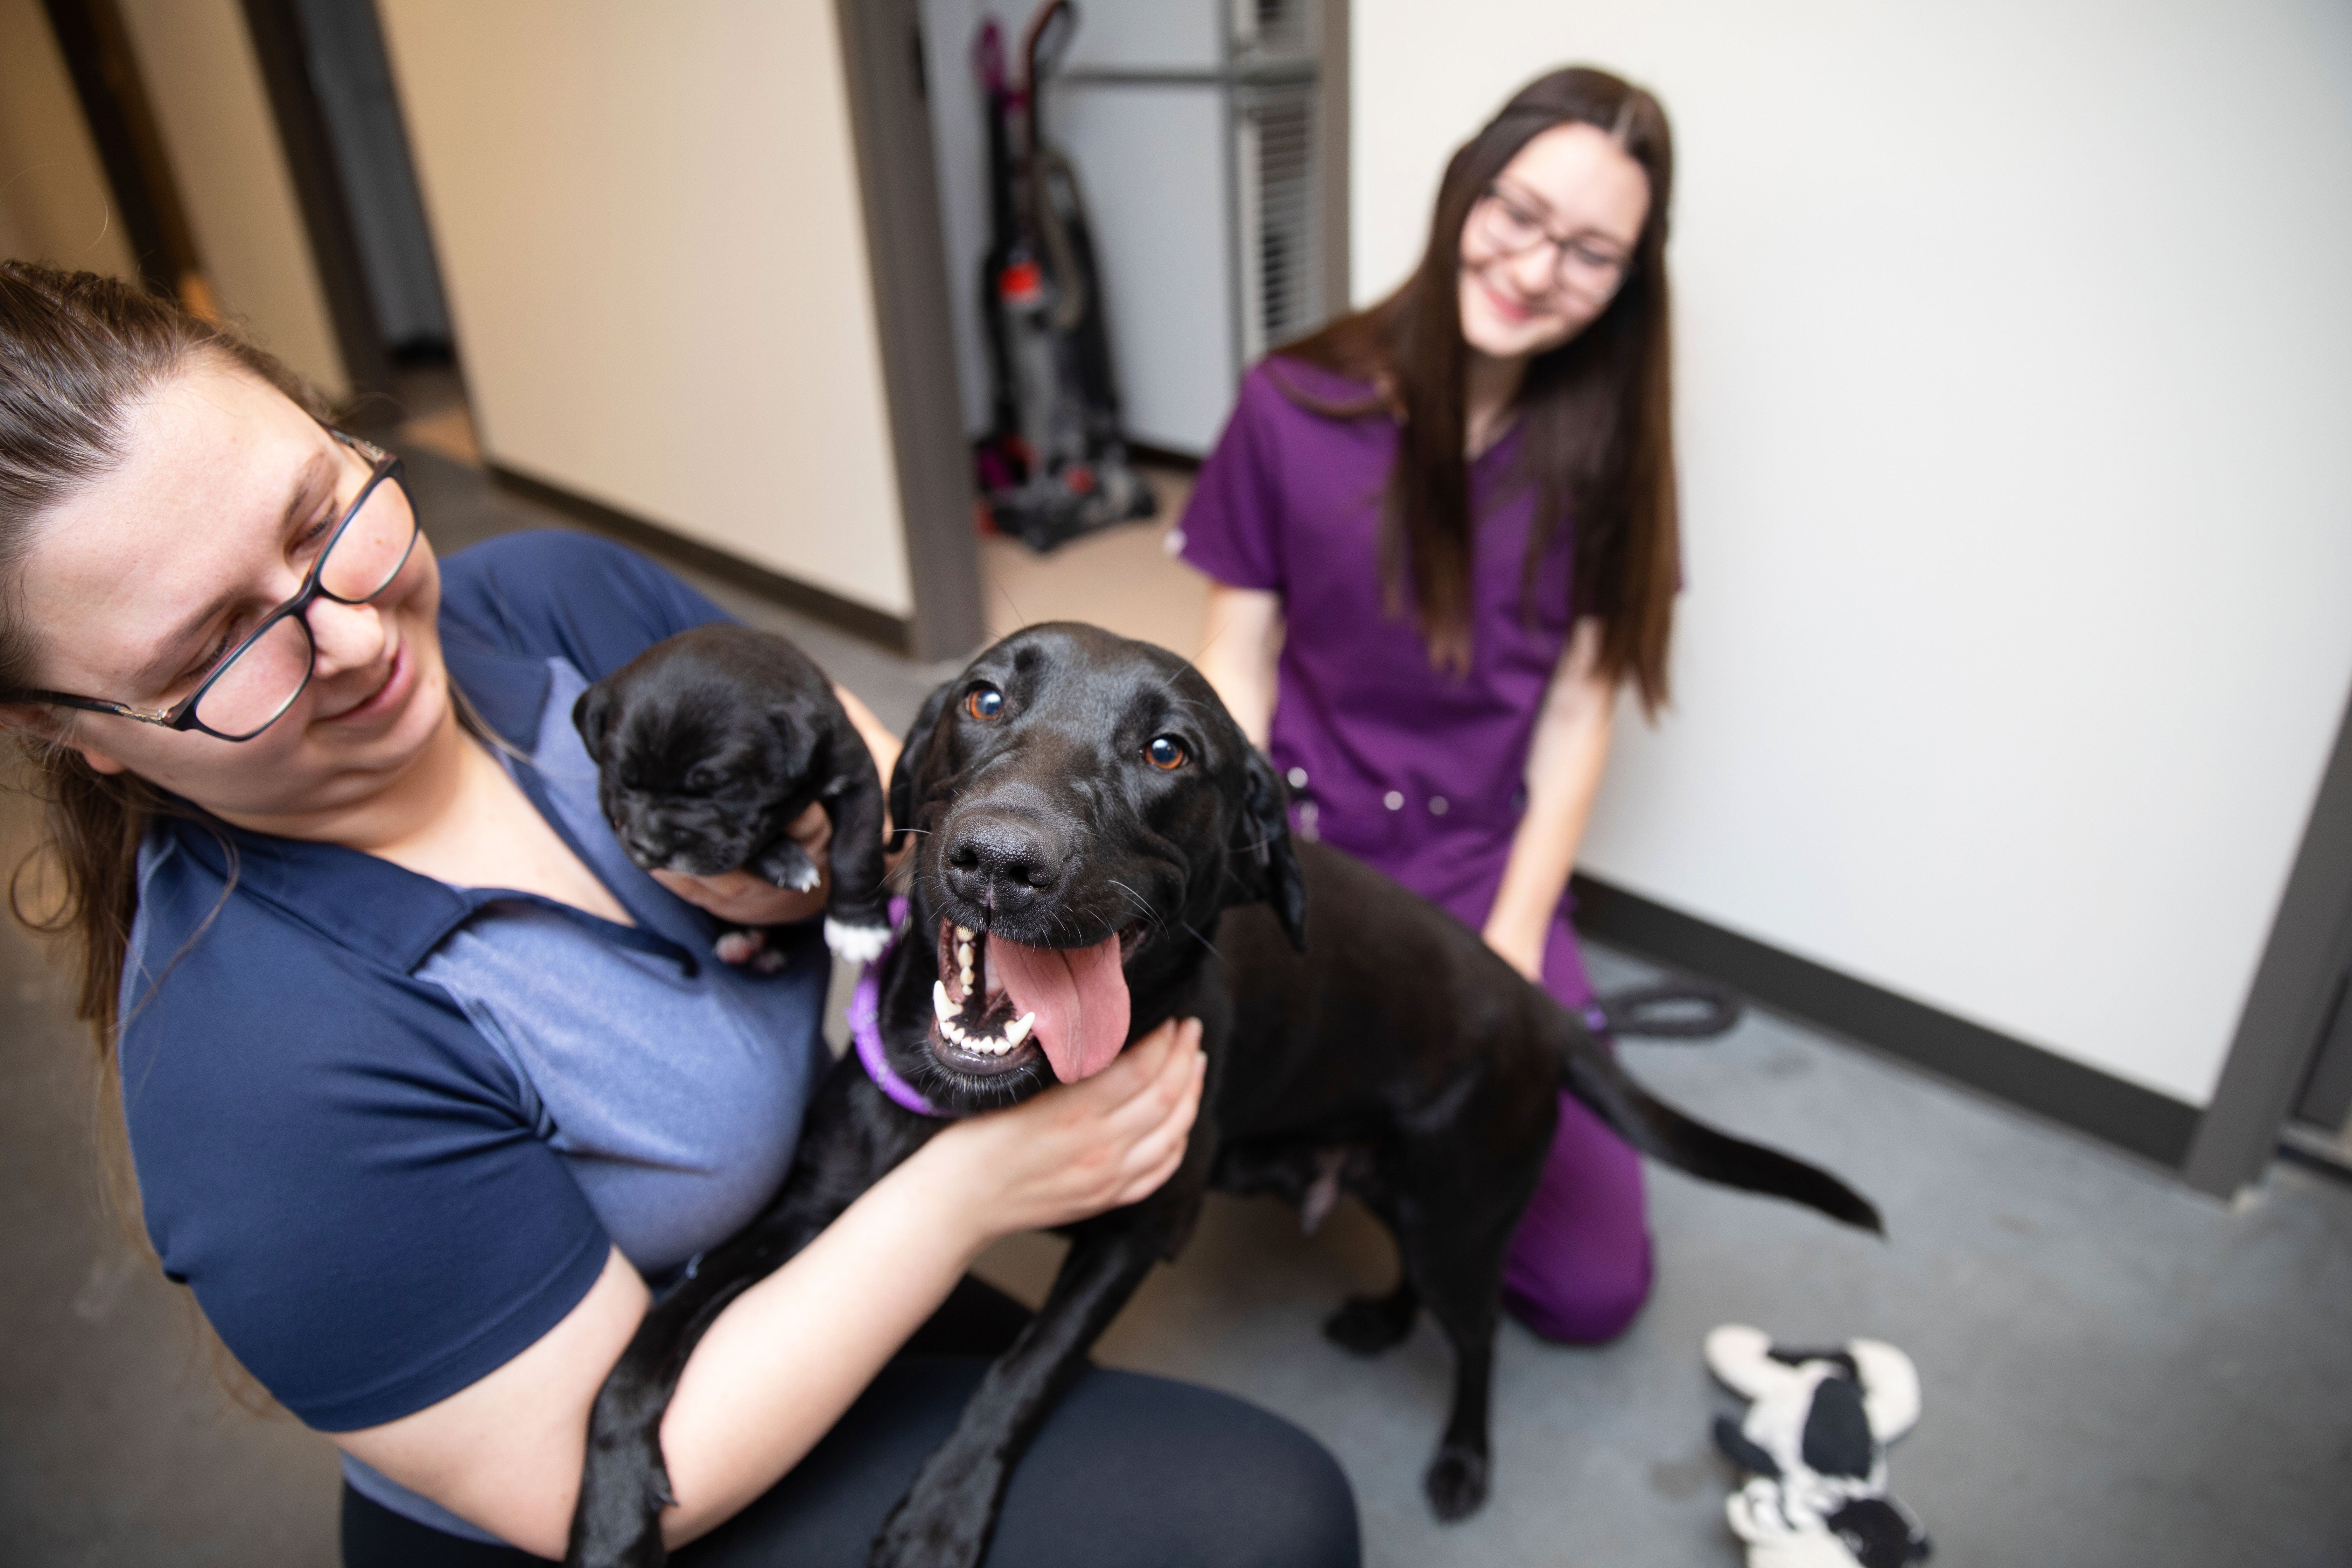 Two shelter workers with a happy, large black dog and puppy